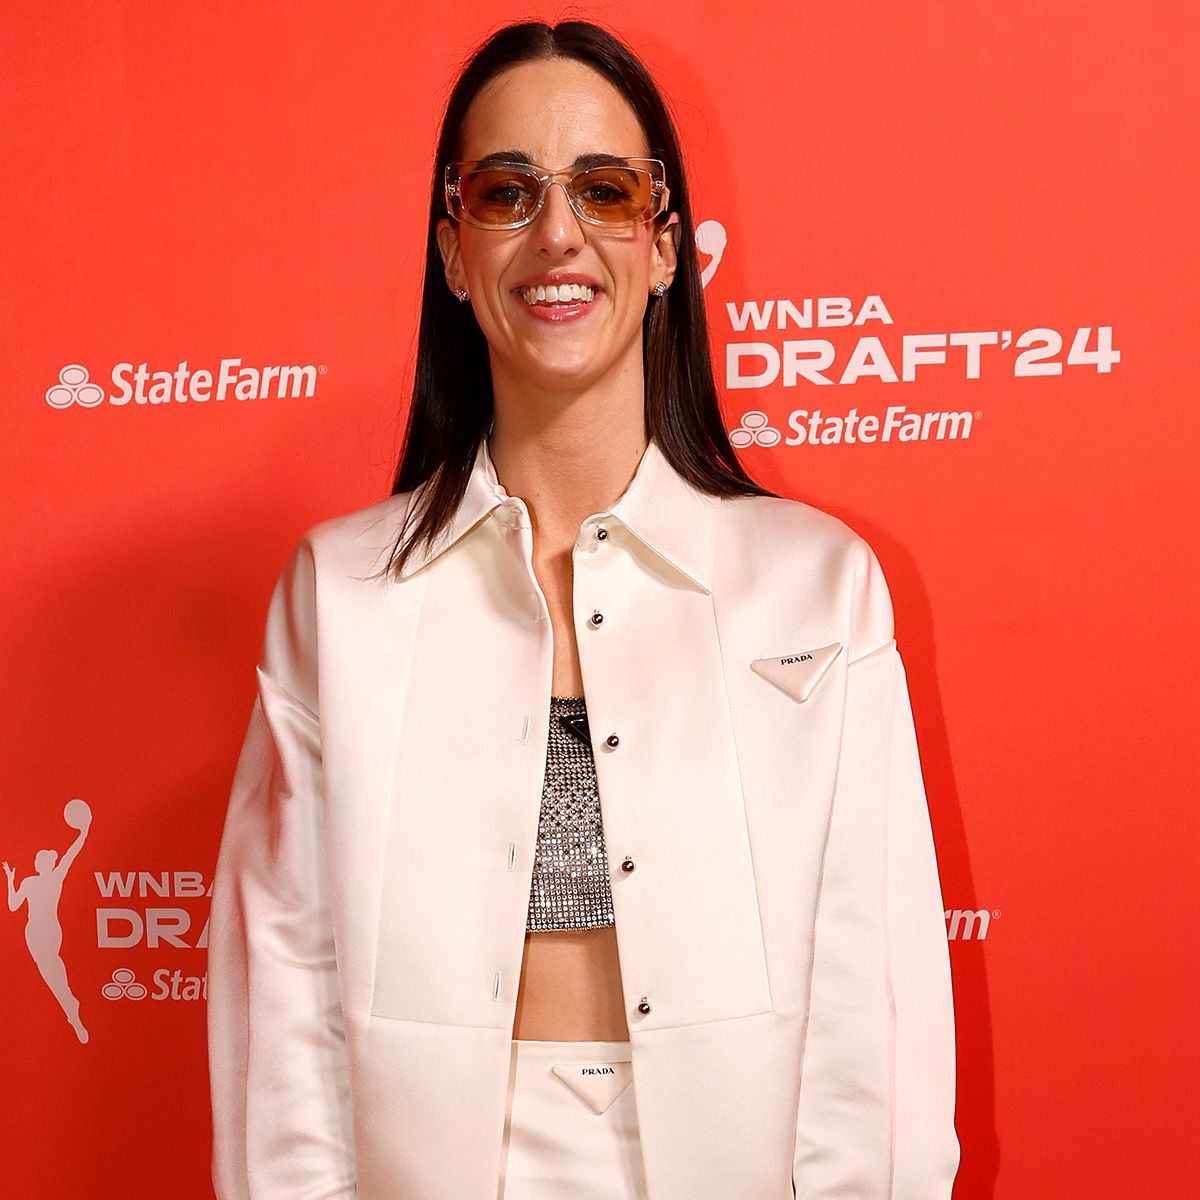 From Prada to Balmain, This is What the Subsequent WNBA Stars Wore on Draft Night time